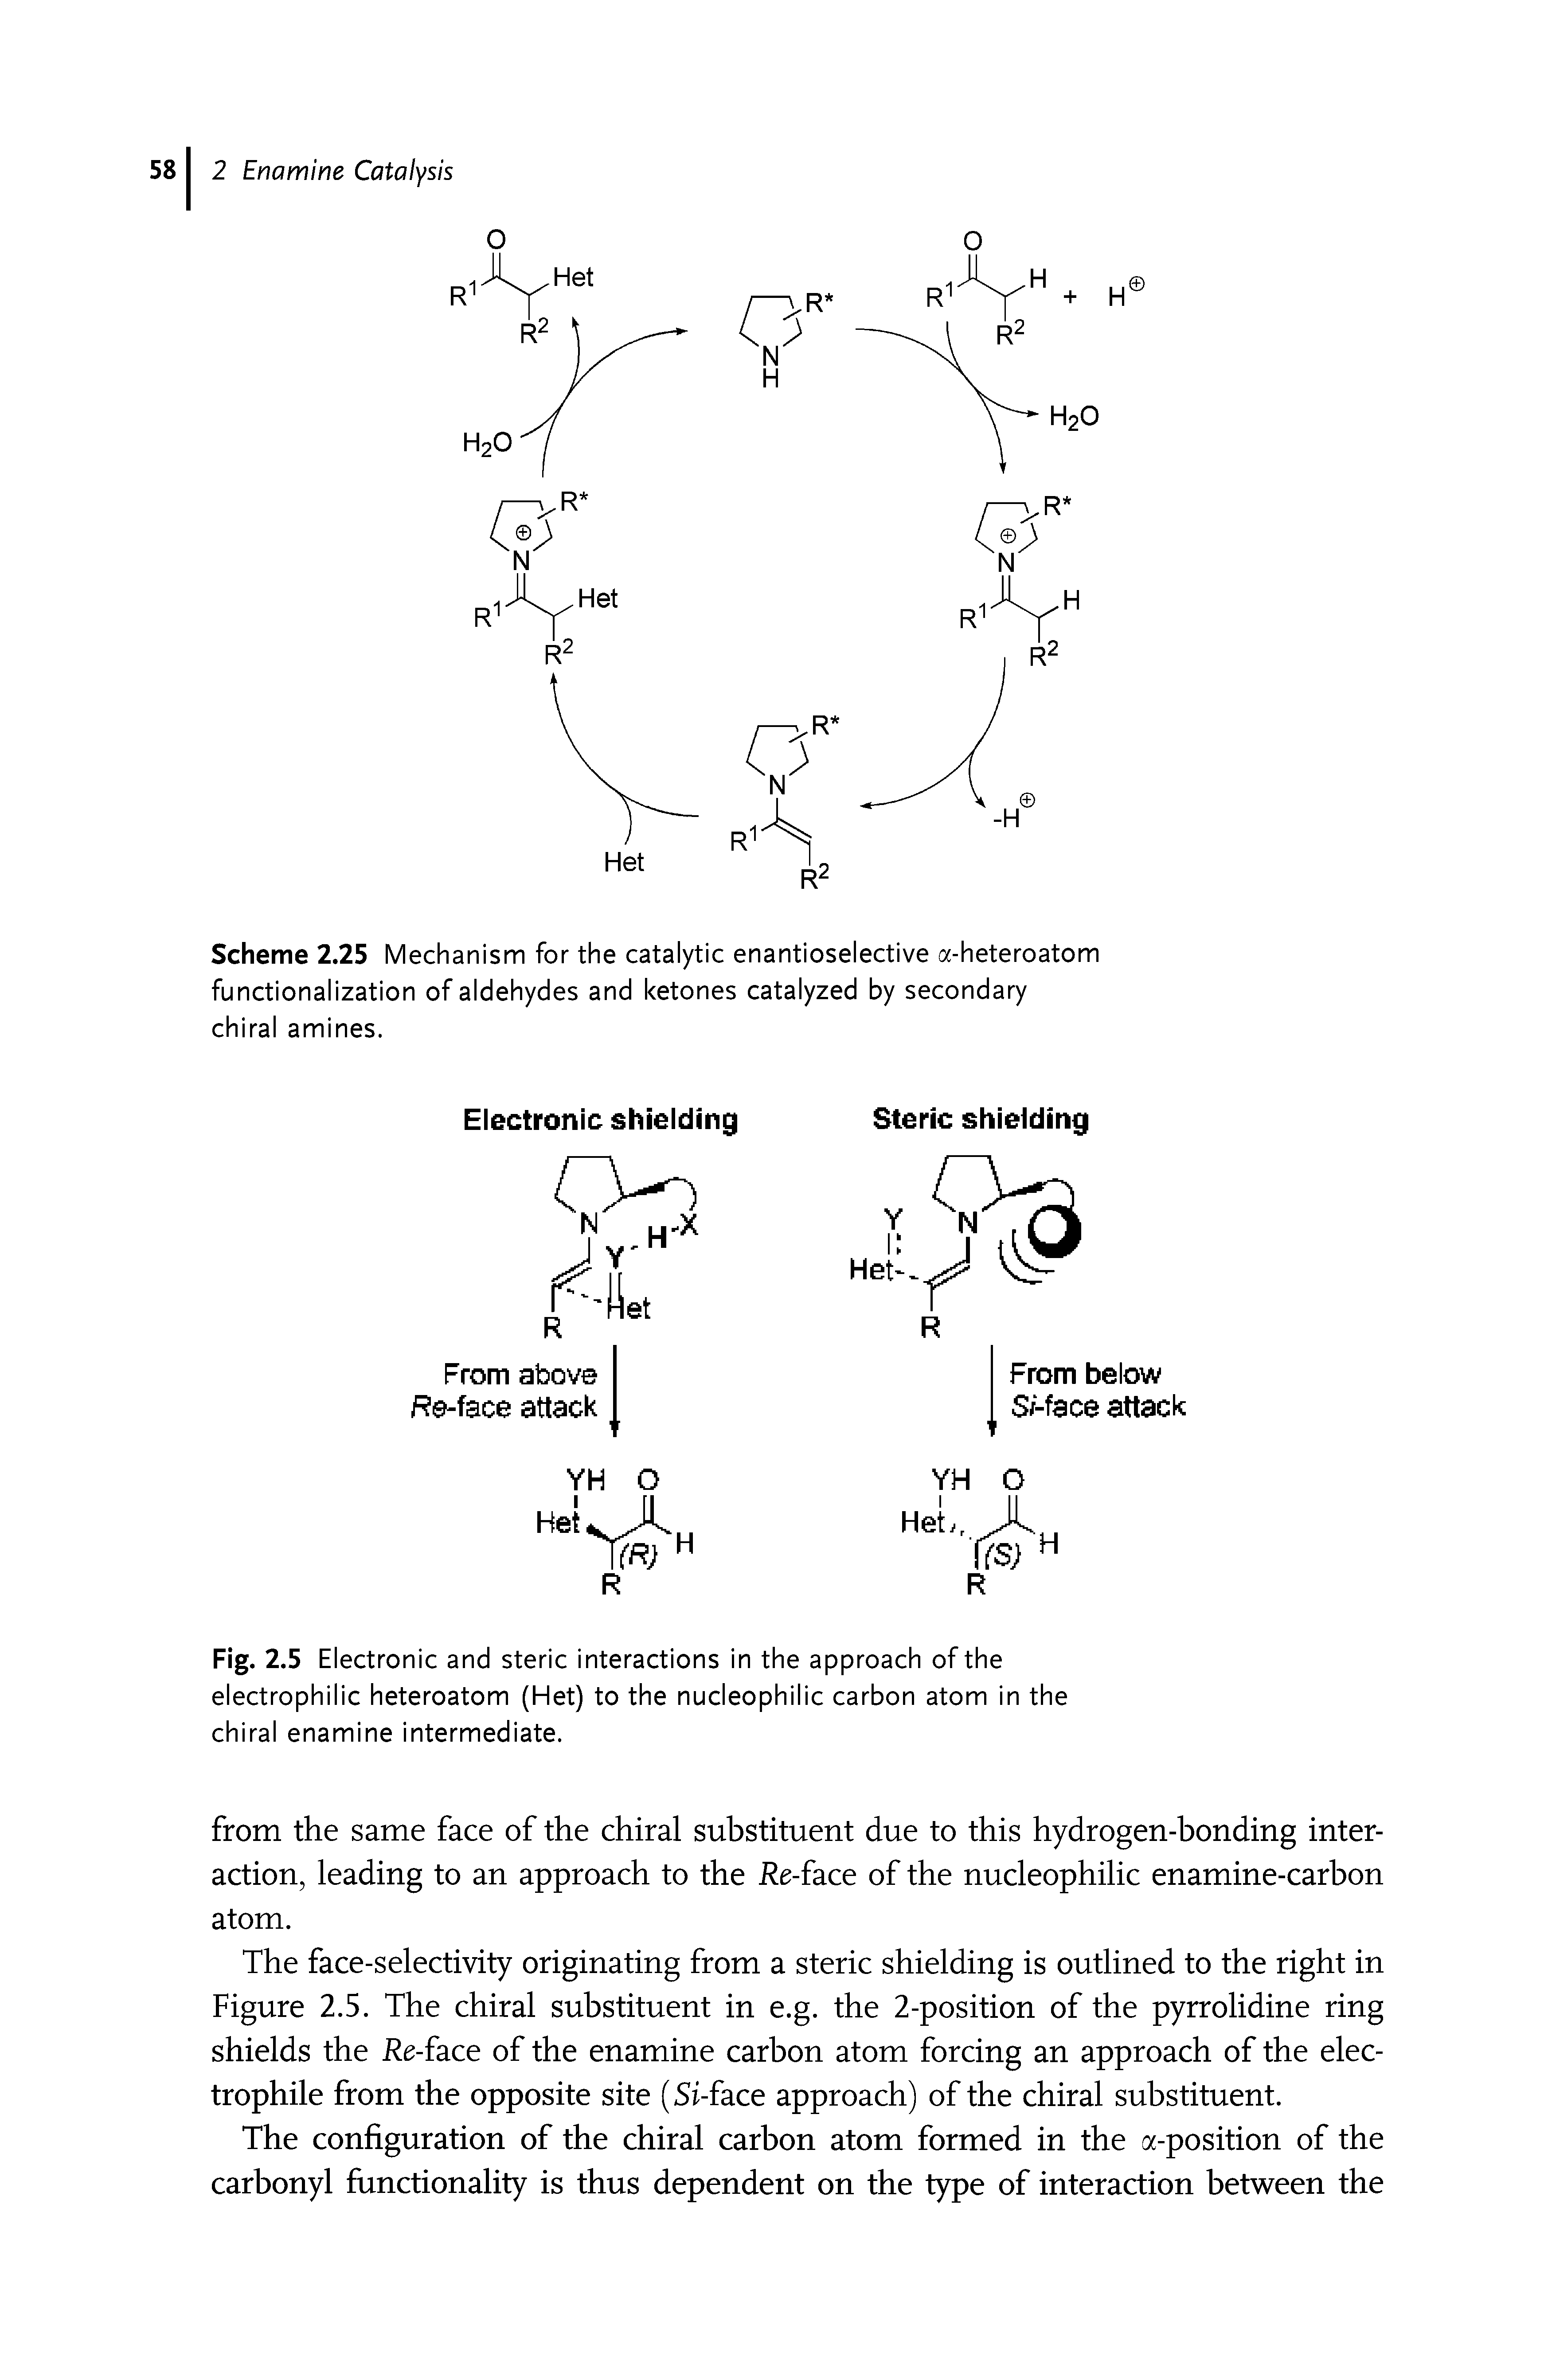 Scheme 2.25 Mechanism for the catalytic enantioselective a-heteroatom functionalization of aldehydes and ketones catalyzed by secondary chiral amines.